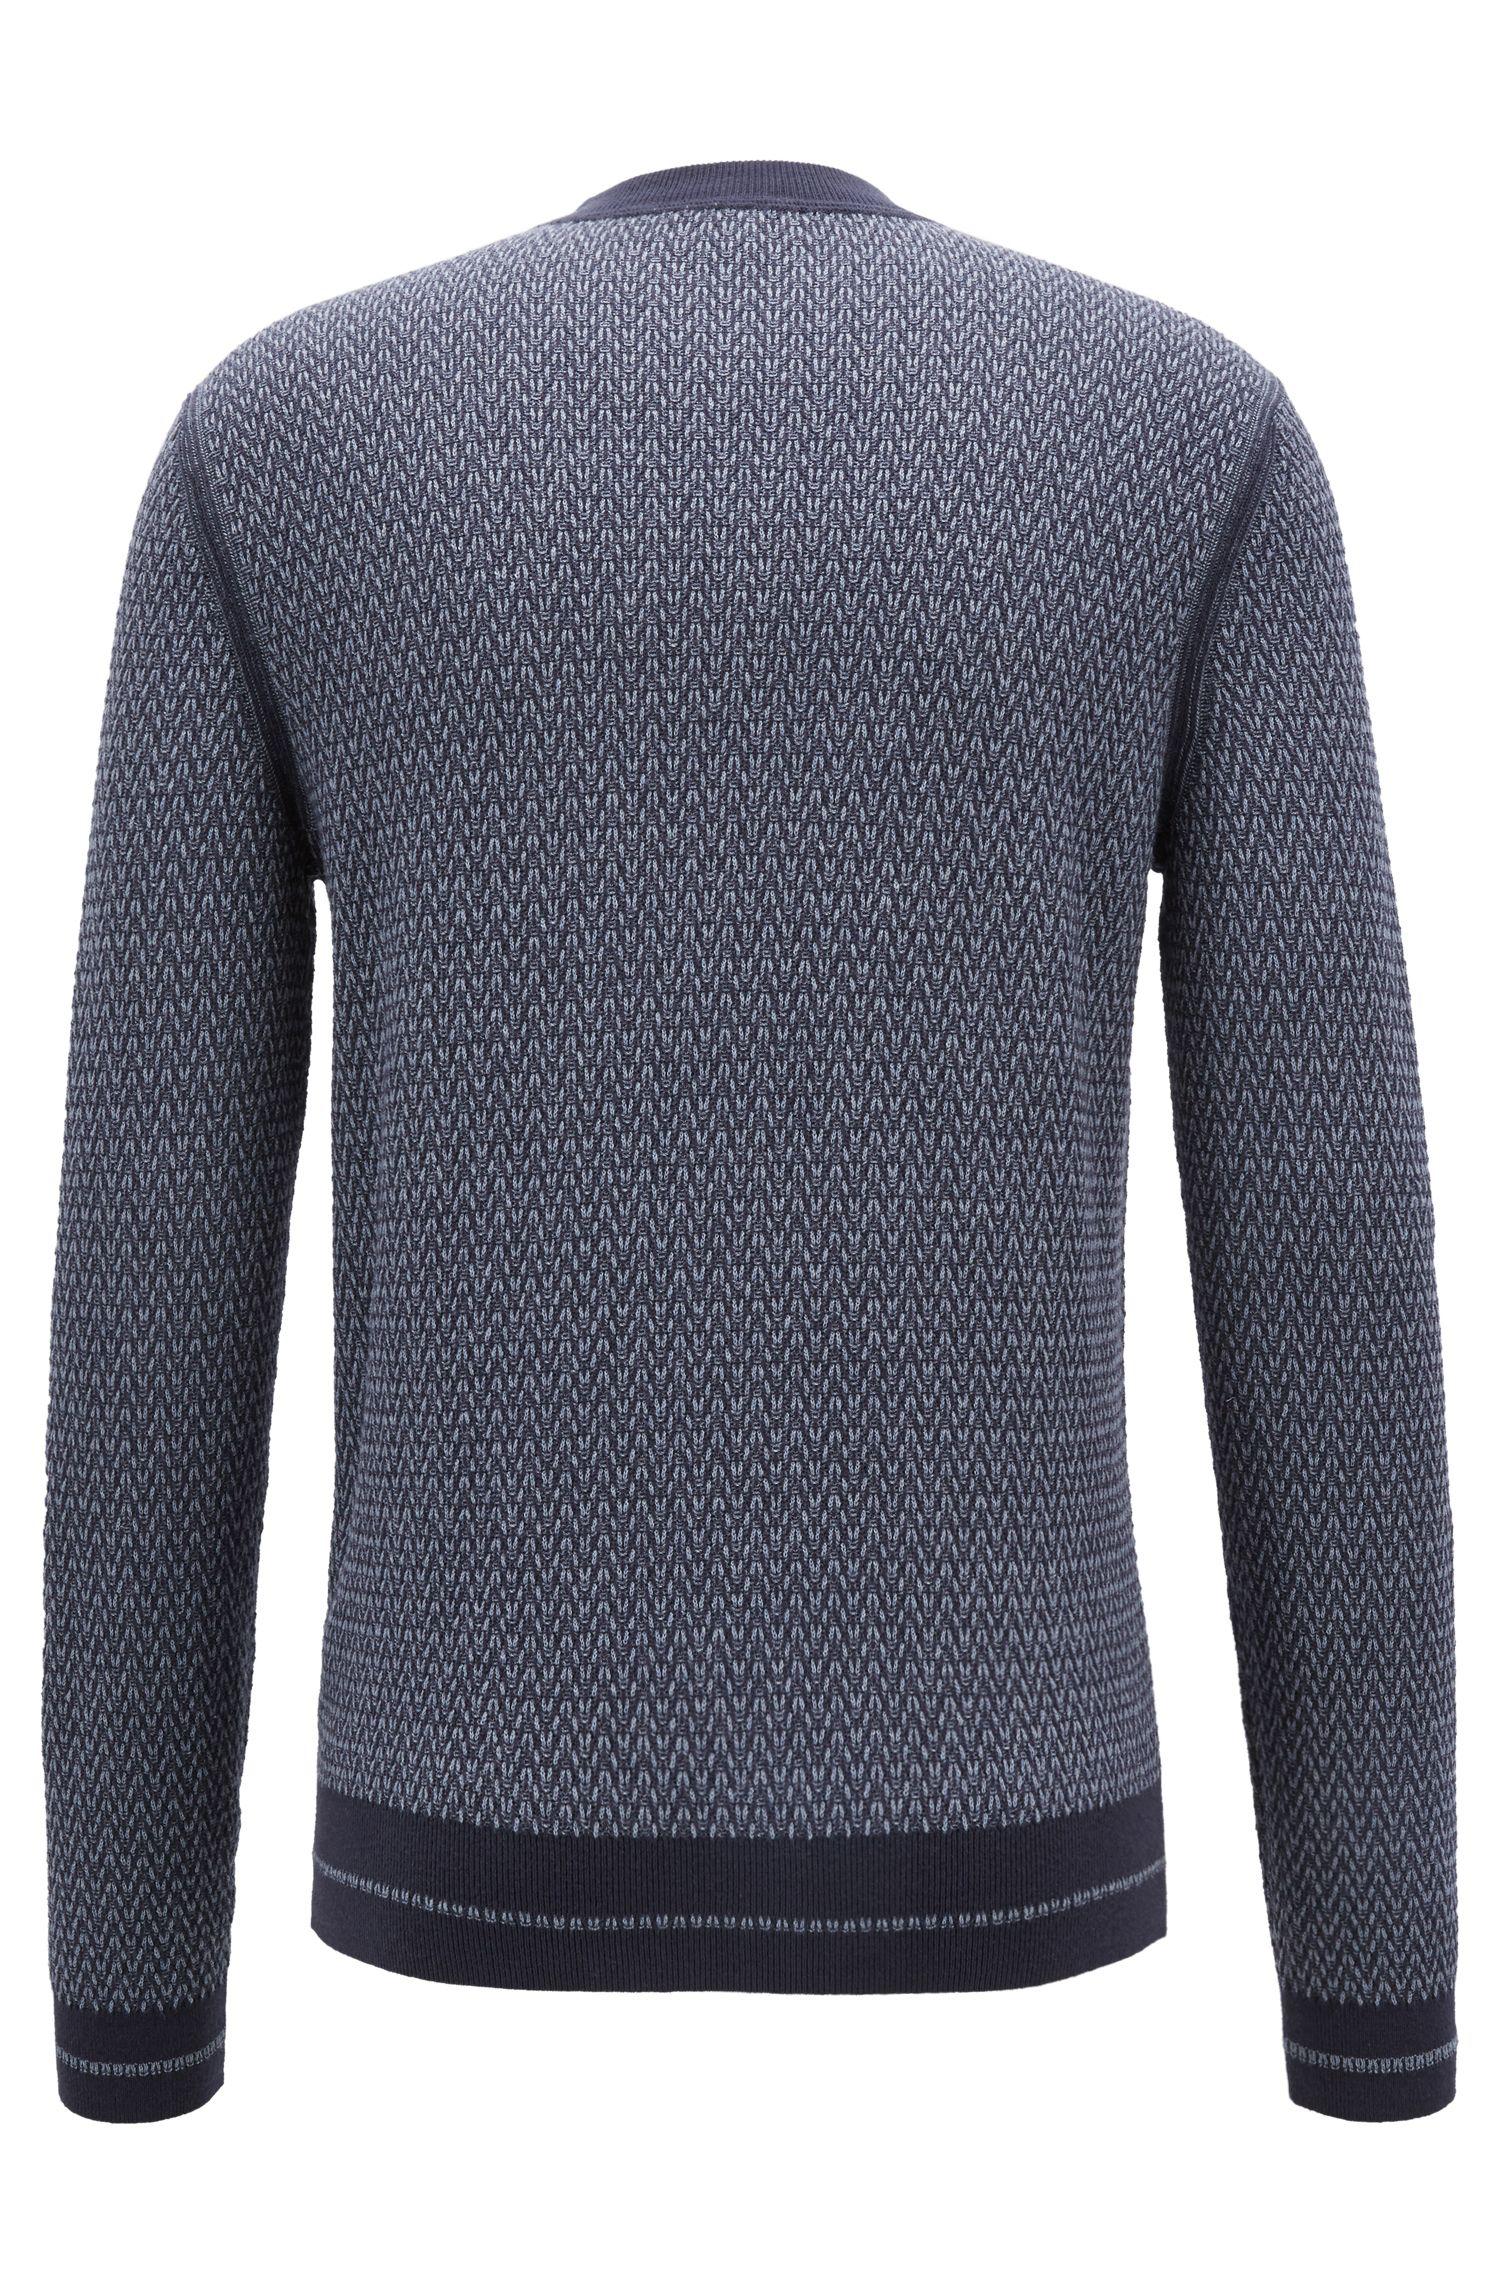 Lyst - BOSS Crew-neck Sweater In A Micro-structured Cotton Blend in ...